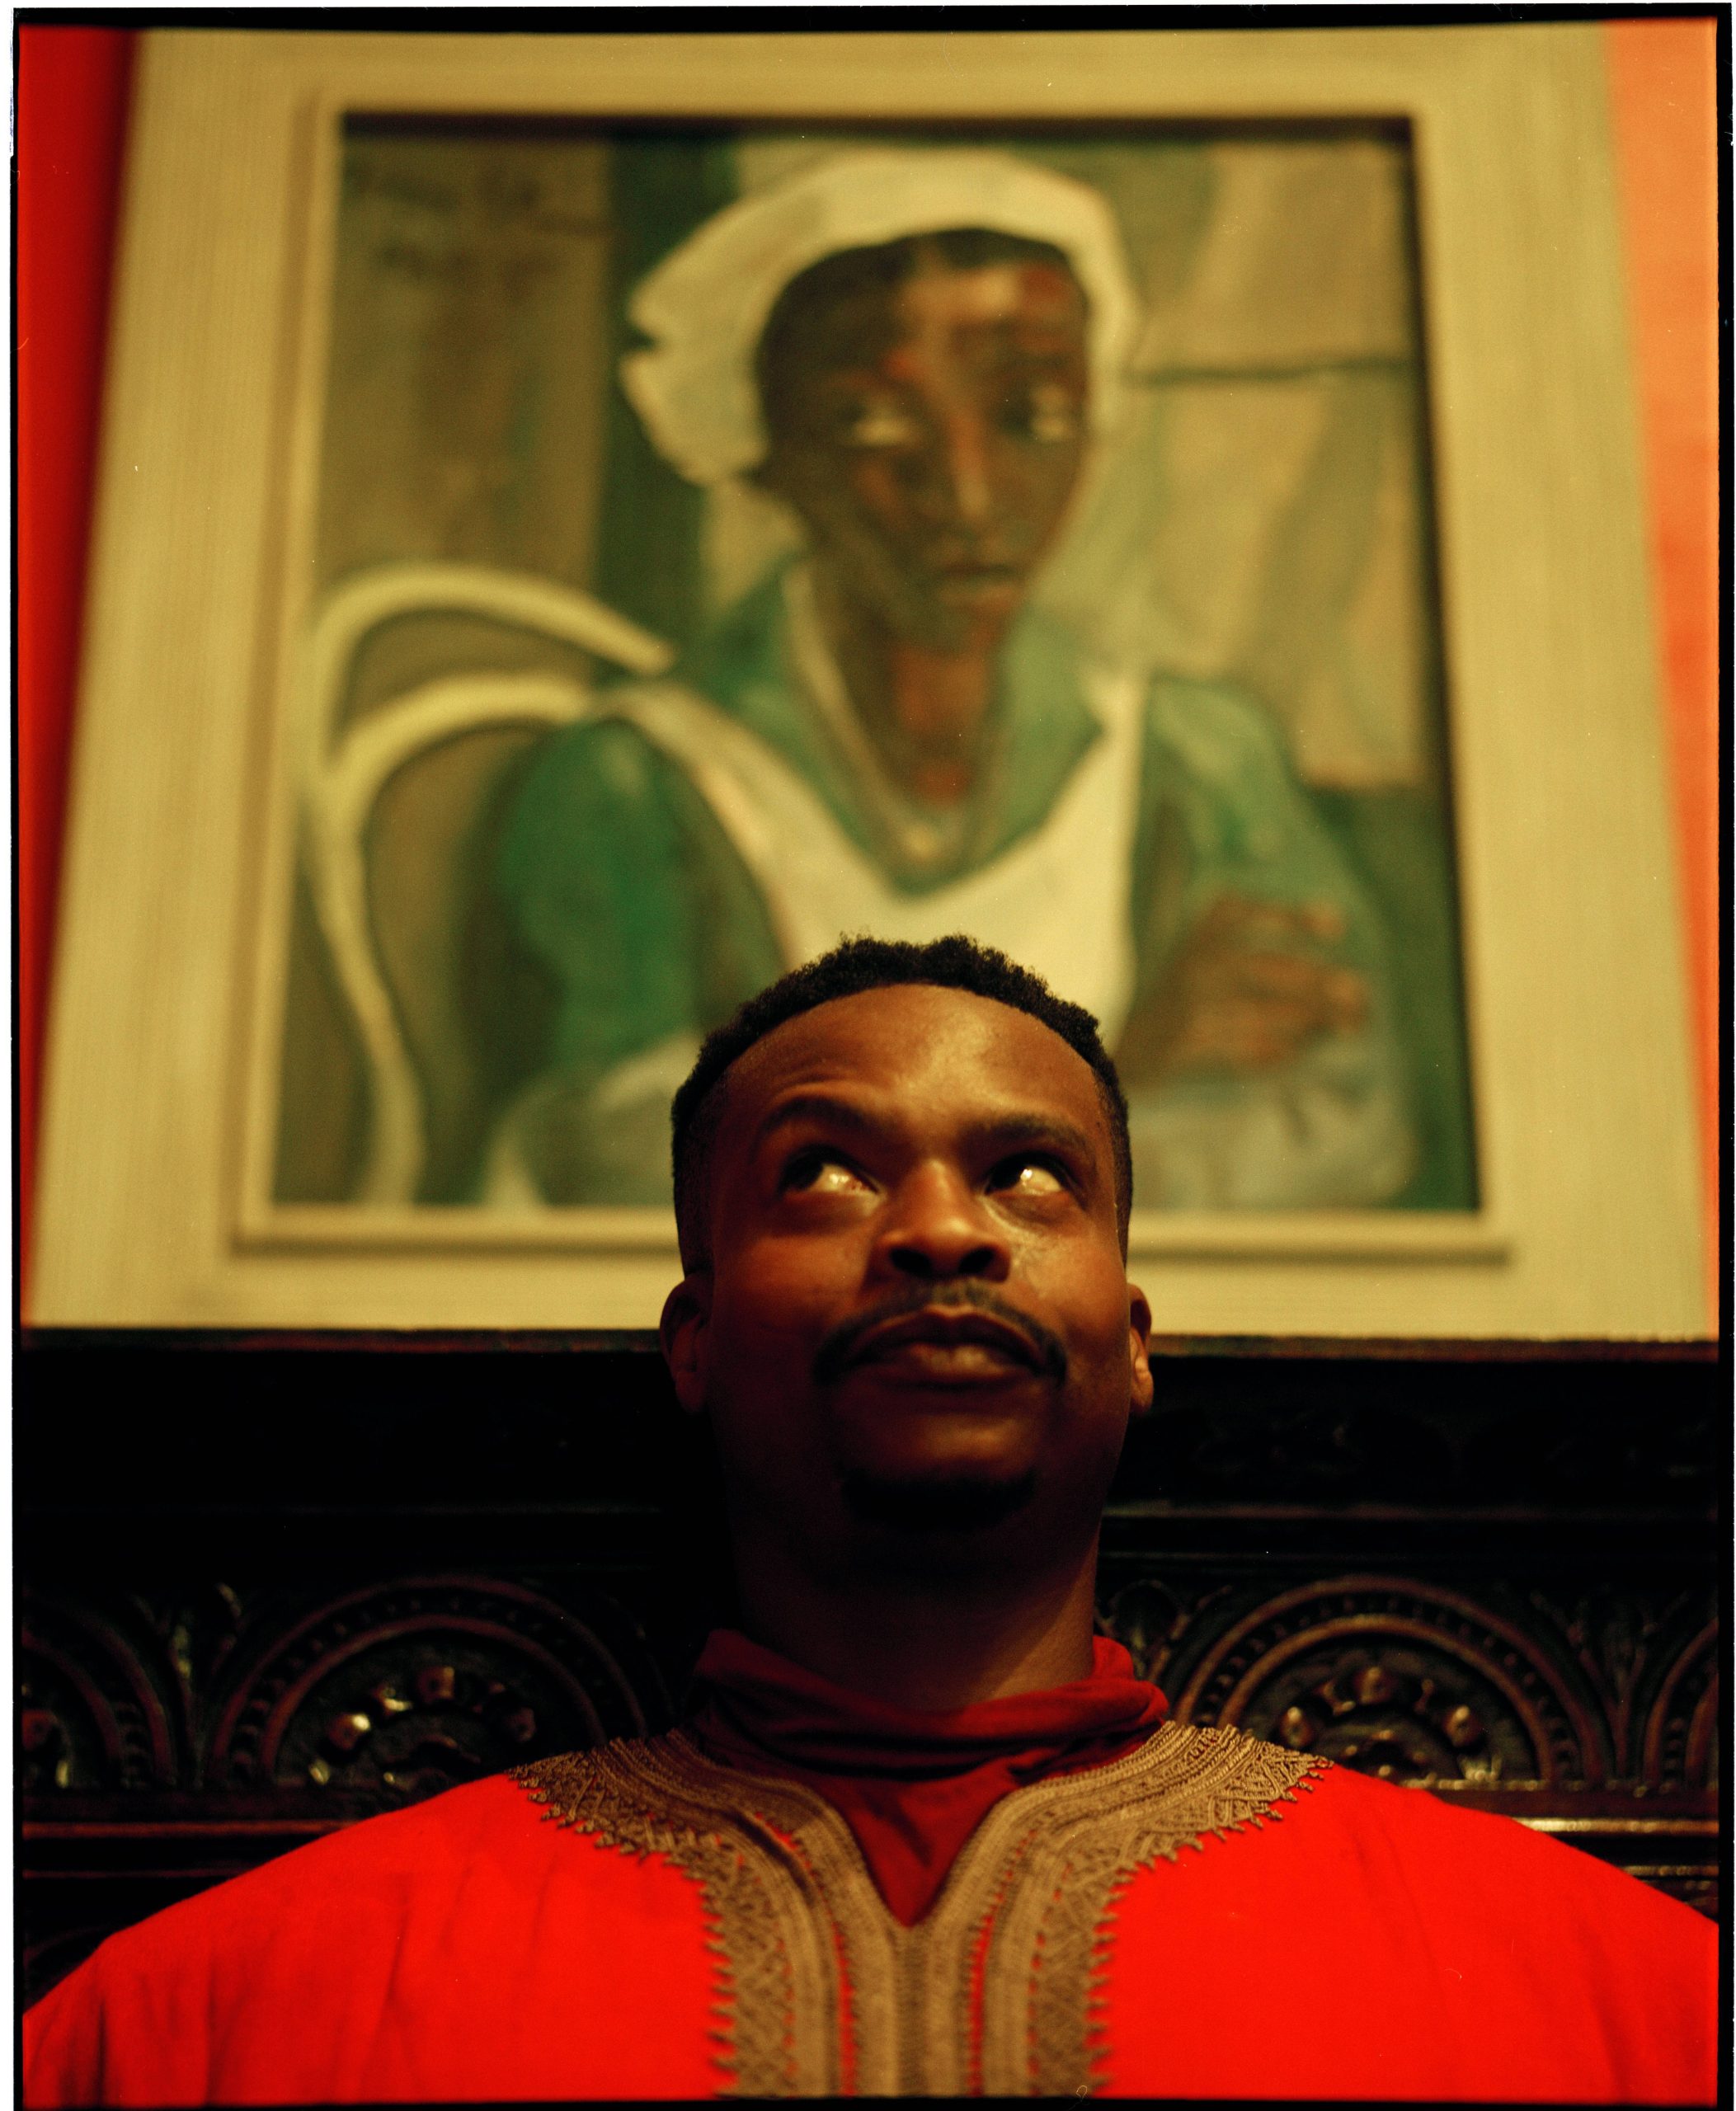 Portrait of Athi-Patra Ruga at the Irma Stern Museum